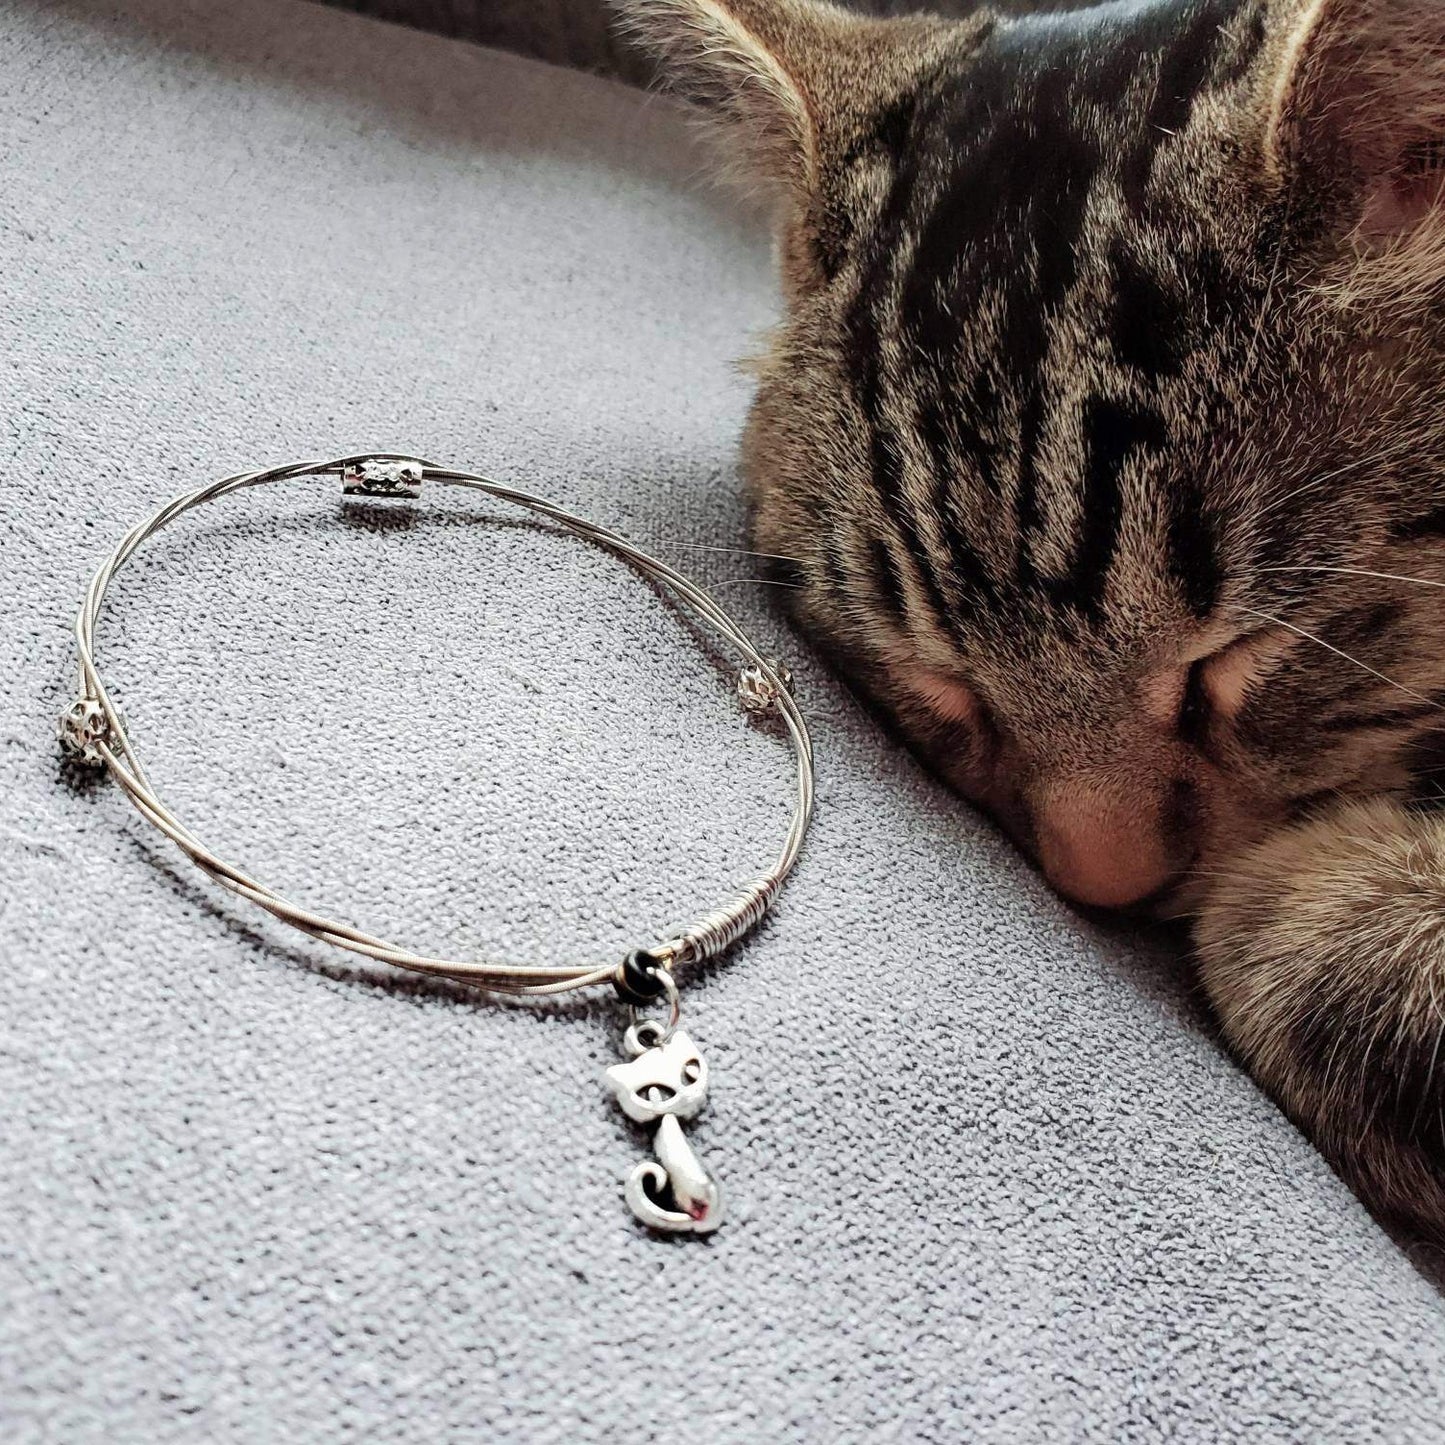 a silver coloured bangle style bracelet made from an upcycled guitar string on which a silver coloured cat shaped pendant hangs - a striped cat is sleeping next to the bracelet which sits on a grey background